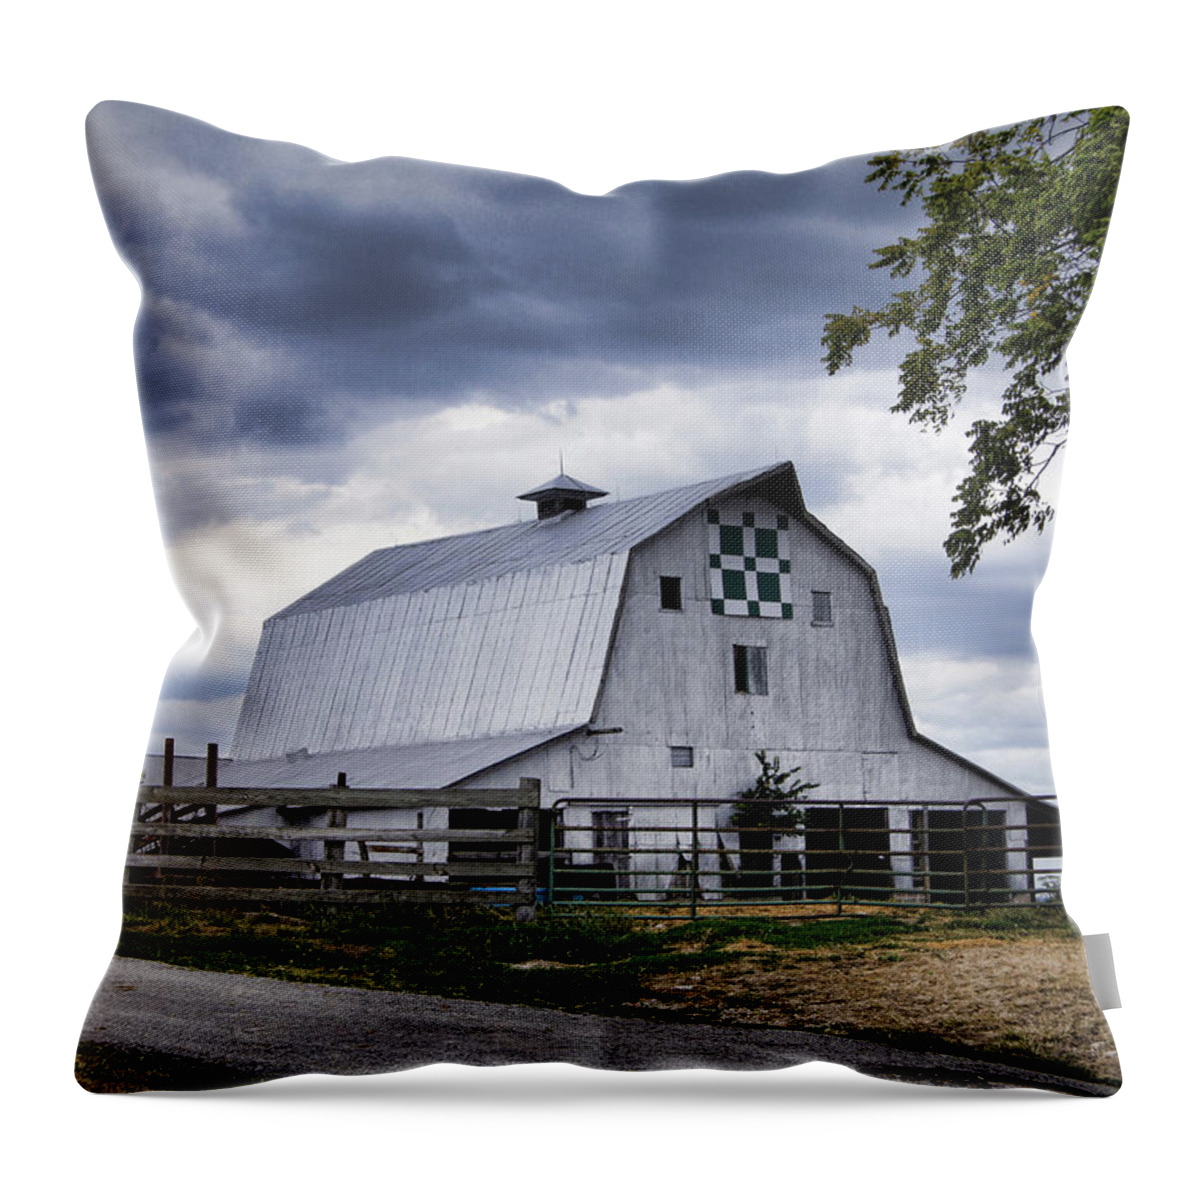 Barn Throw Pillow featuring the photograph Nine Patch Quilt Barn by Cricket Hackmann